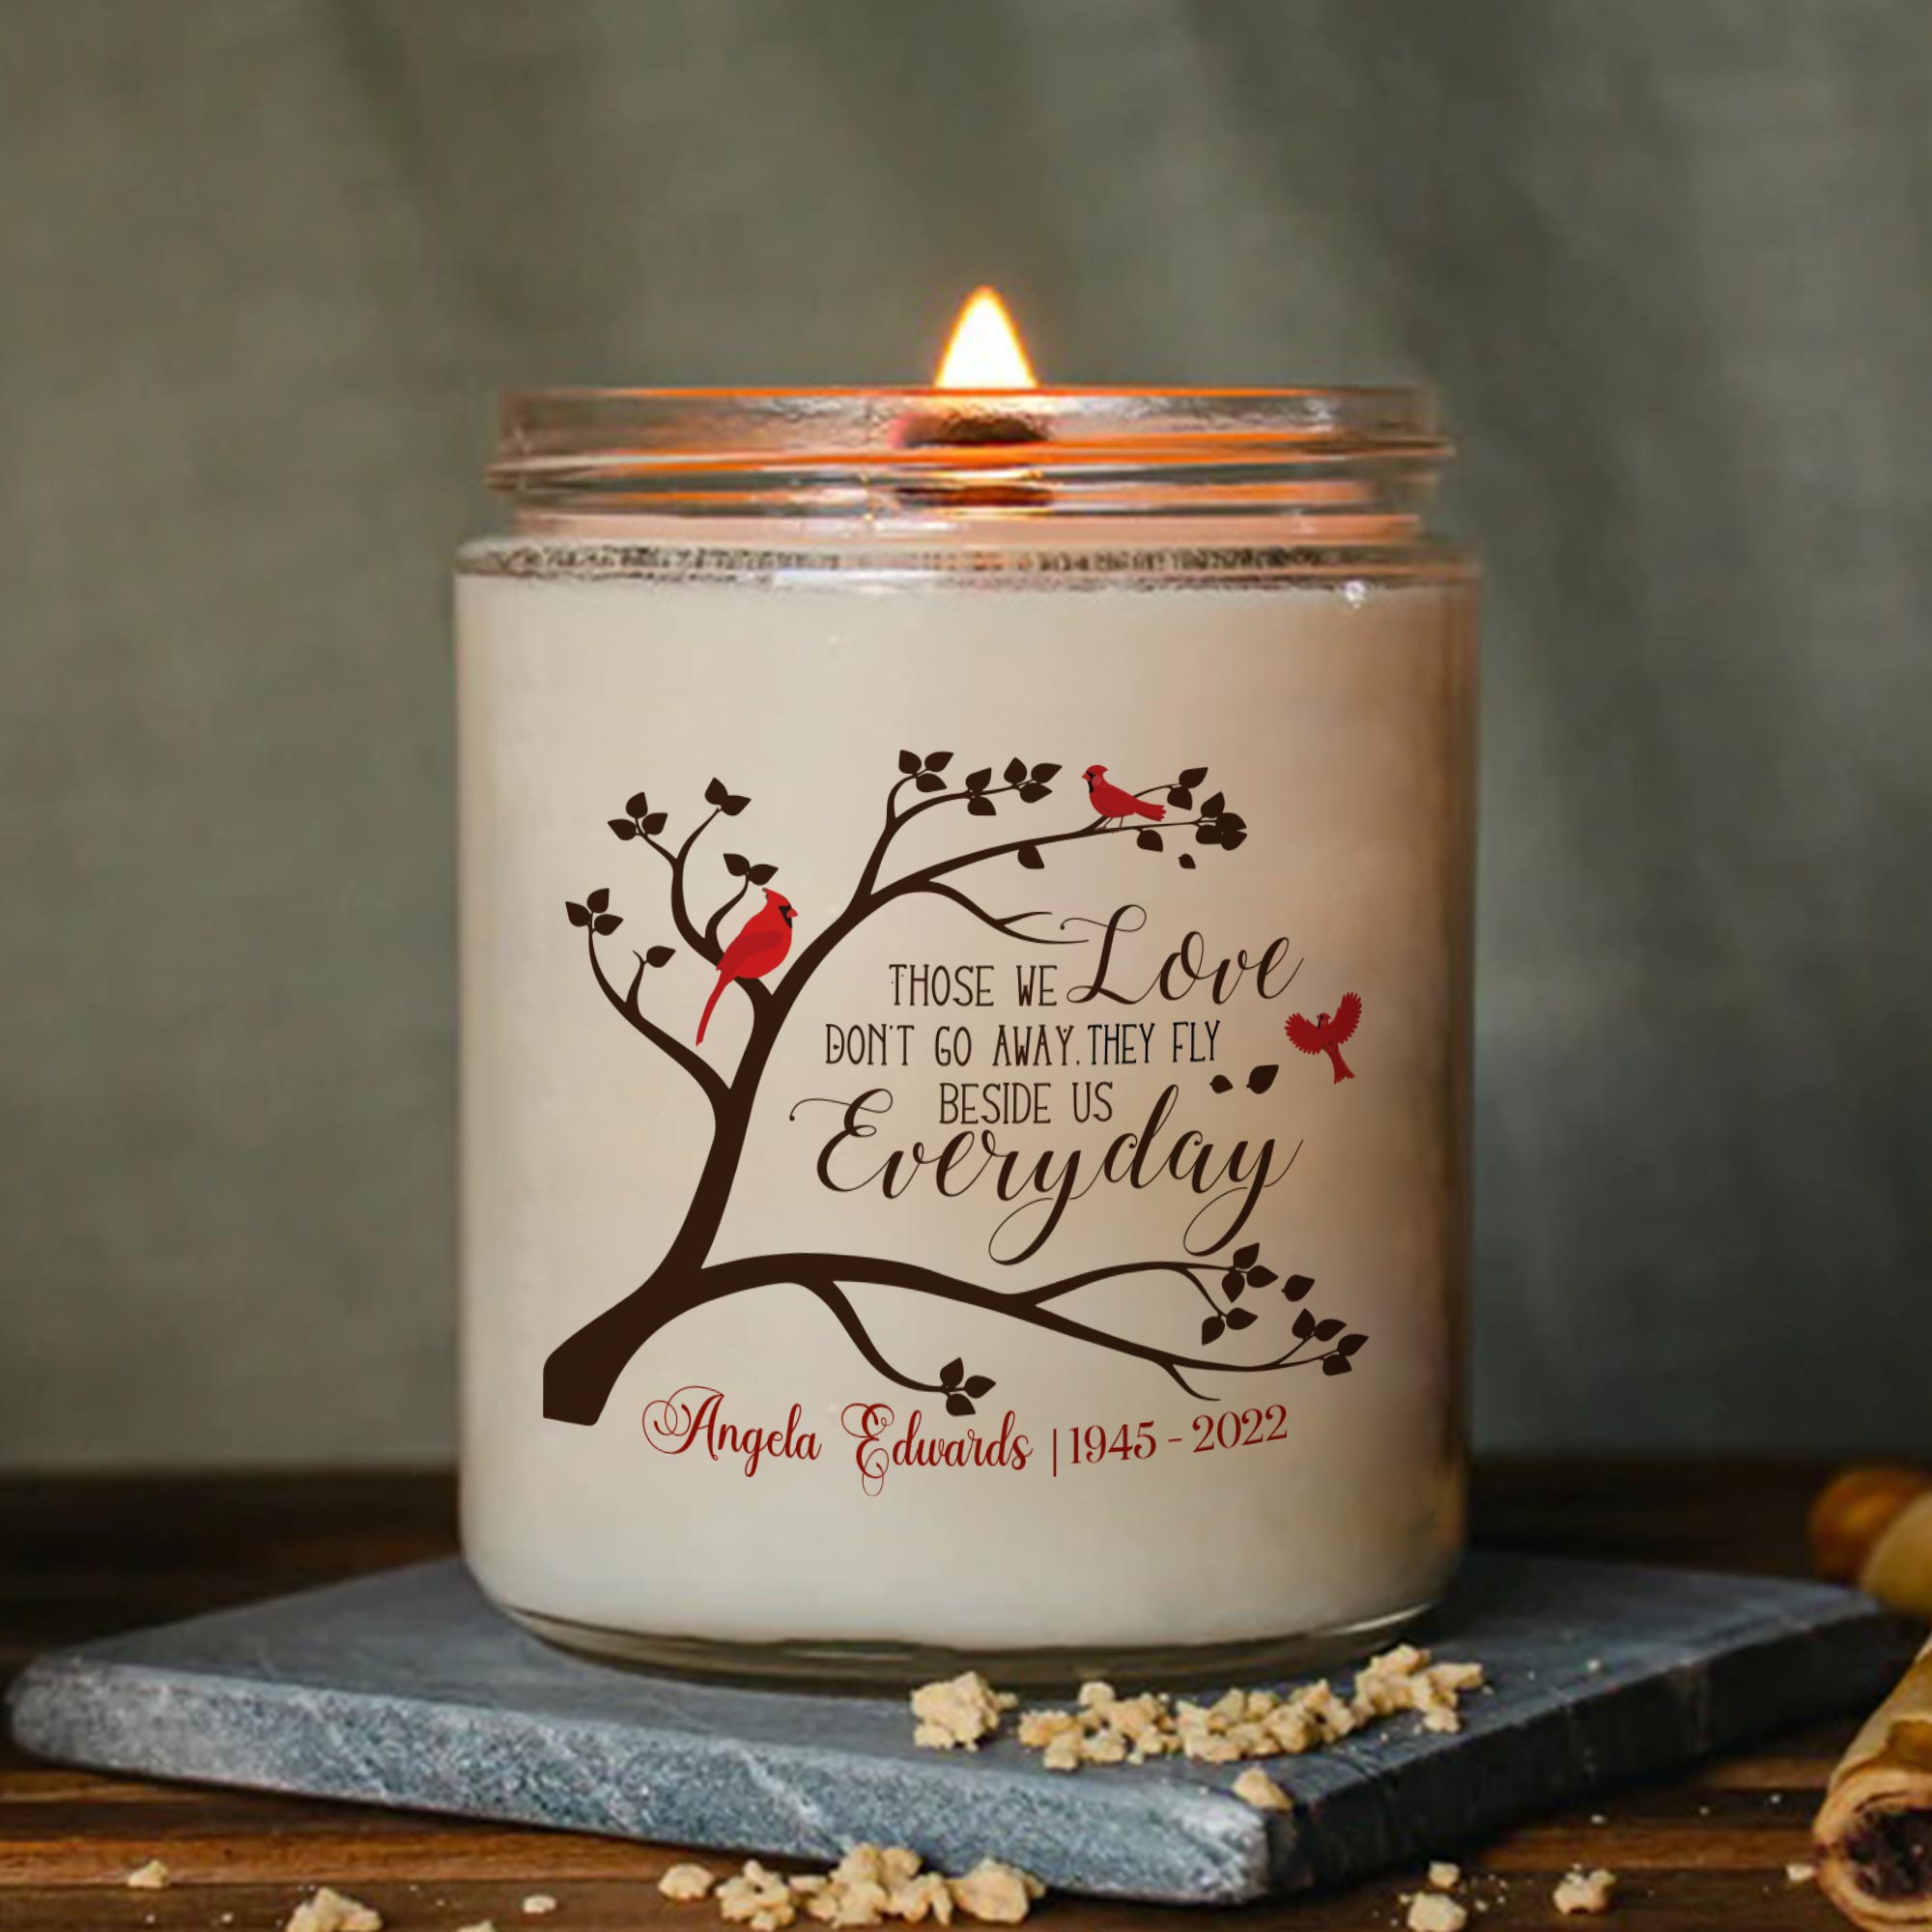 Those We Love Don't Go Away Memorial Candle, Candle In Memory Of A Loved One, Candle Of Remembrance